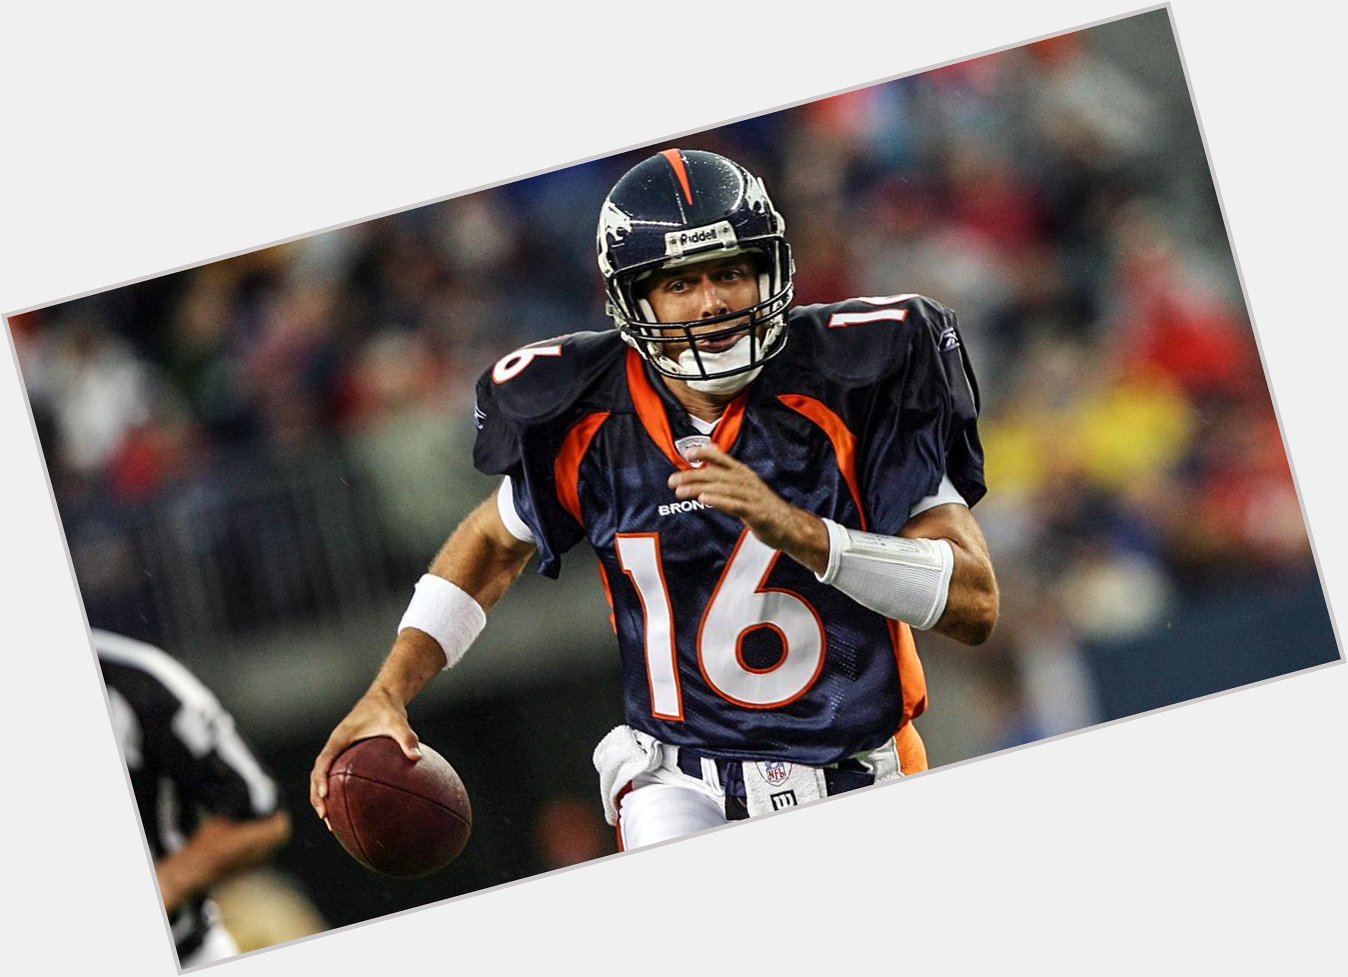 Sending along a Happy Birthday to former QB Jake Plummer ( Give him a RT, 